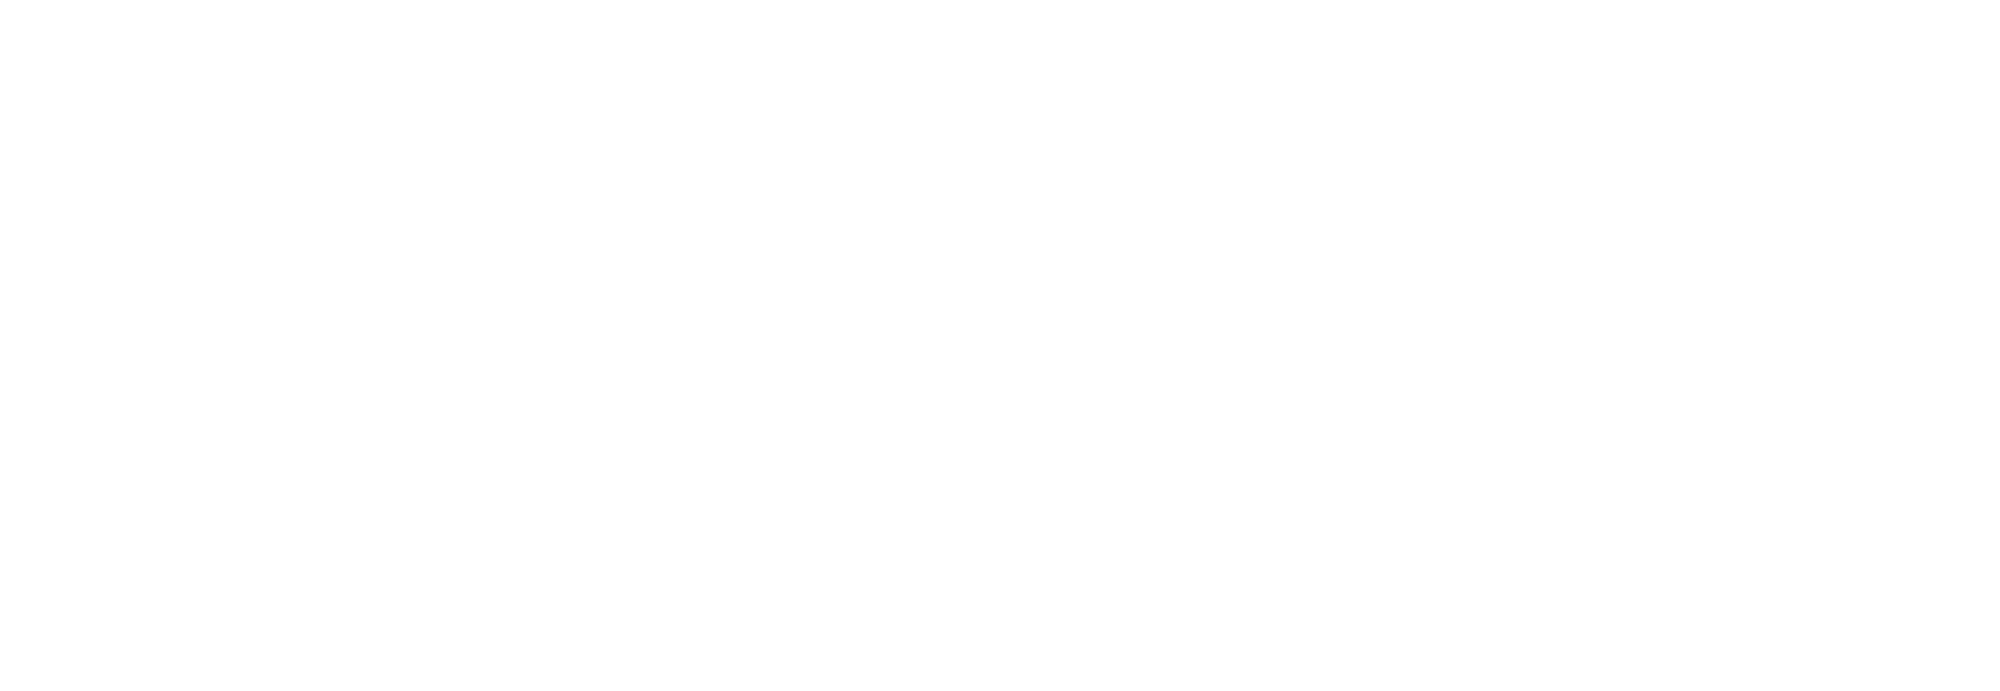 Lawn Inspection